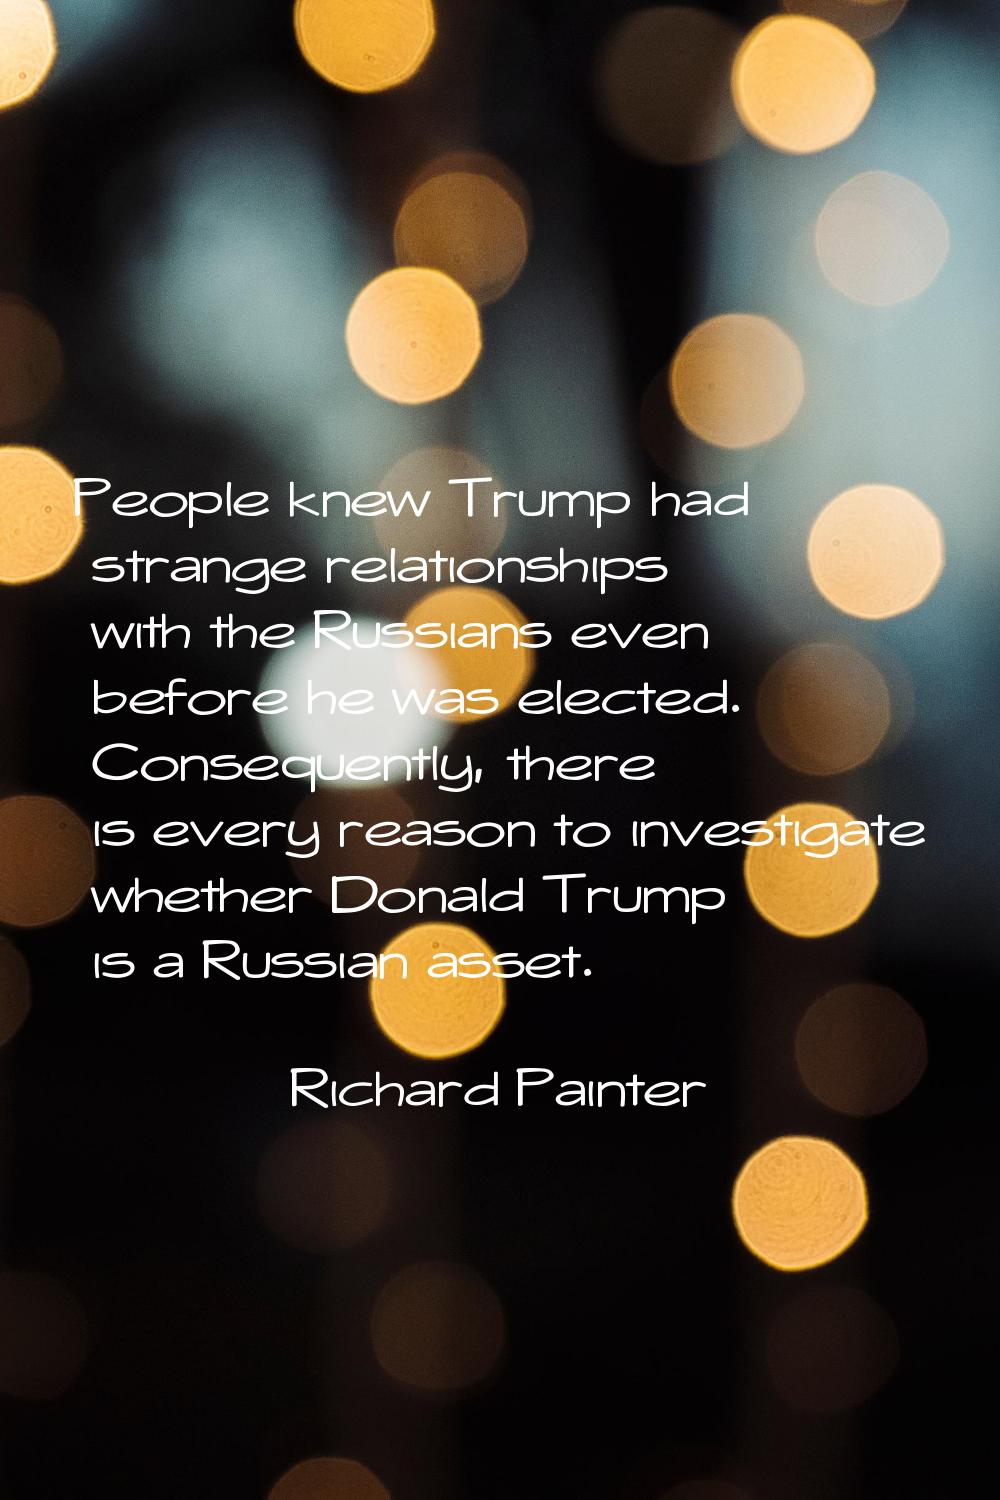 People knew Trump had strange relationships with the Russians even before he was elected. Consequen